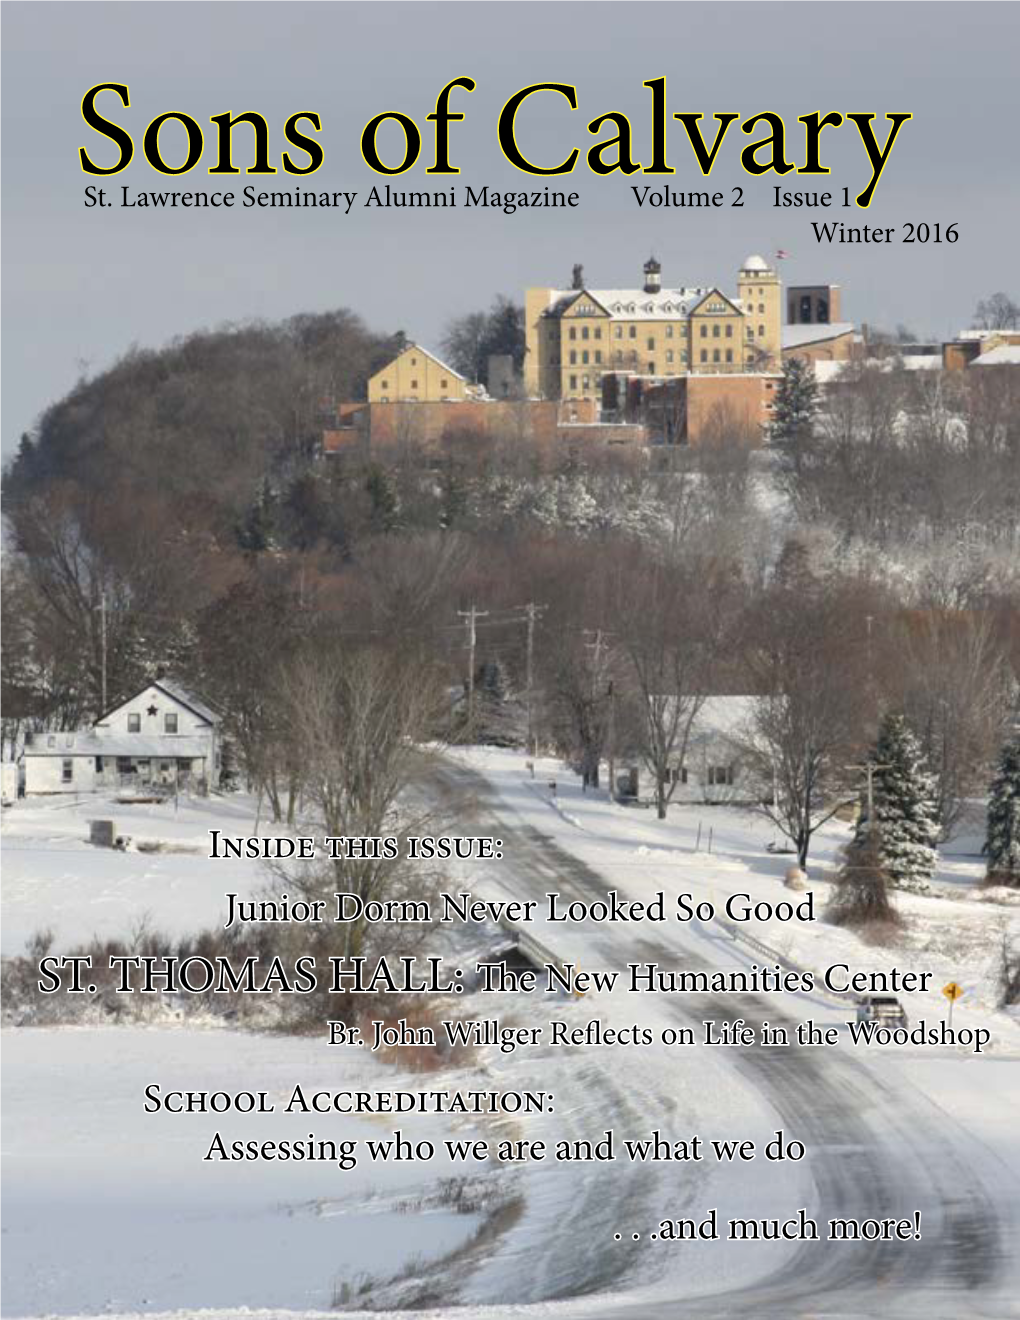 Inside This Issue: ST. THOMAS HALL